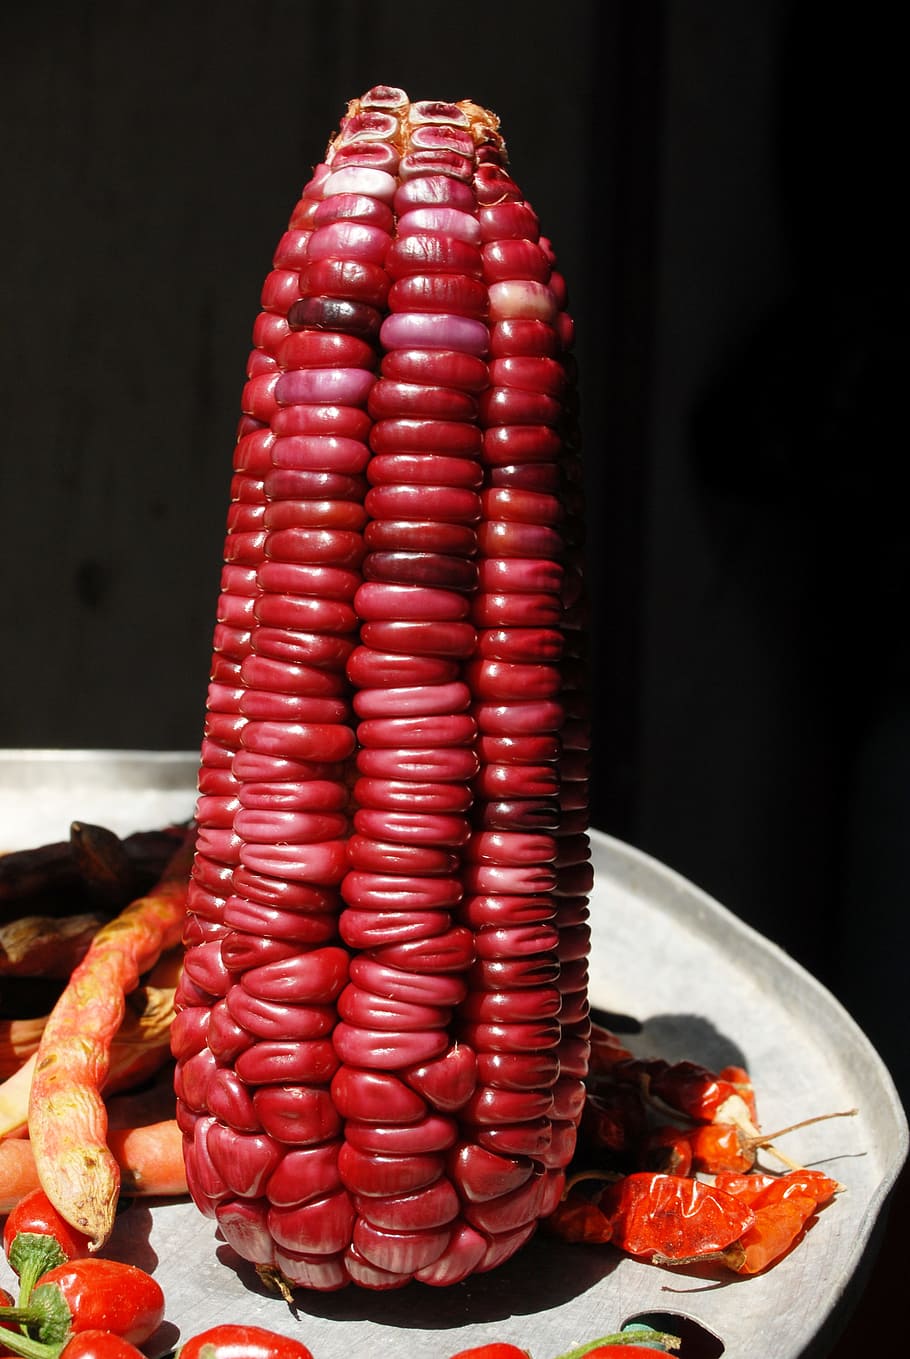 corn, cob, agriculture, food and drink, food, red, freshness, indoors, vegetable, close-up